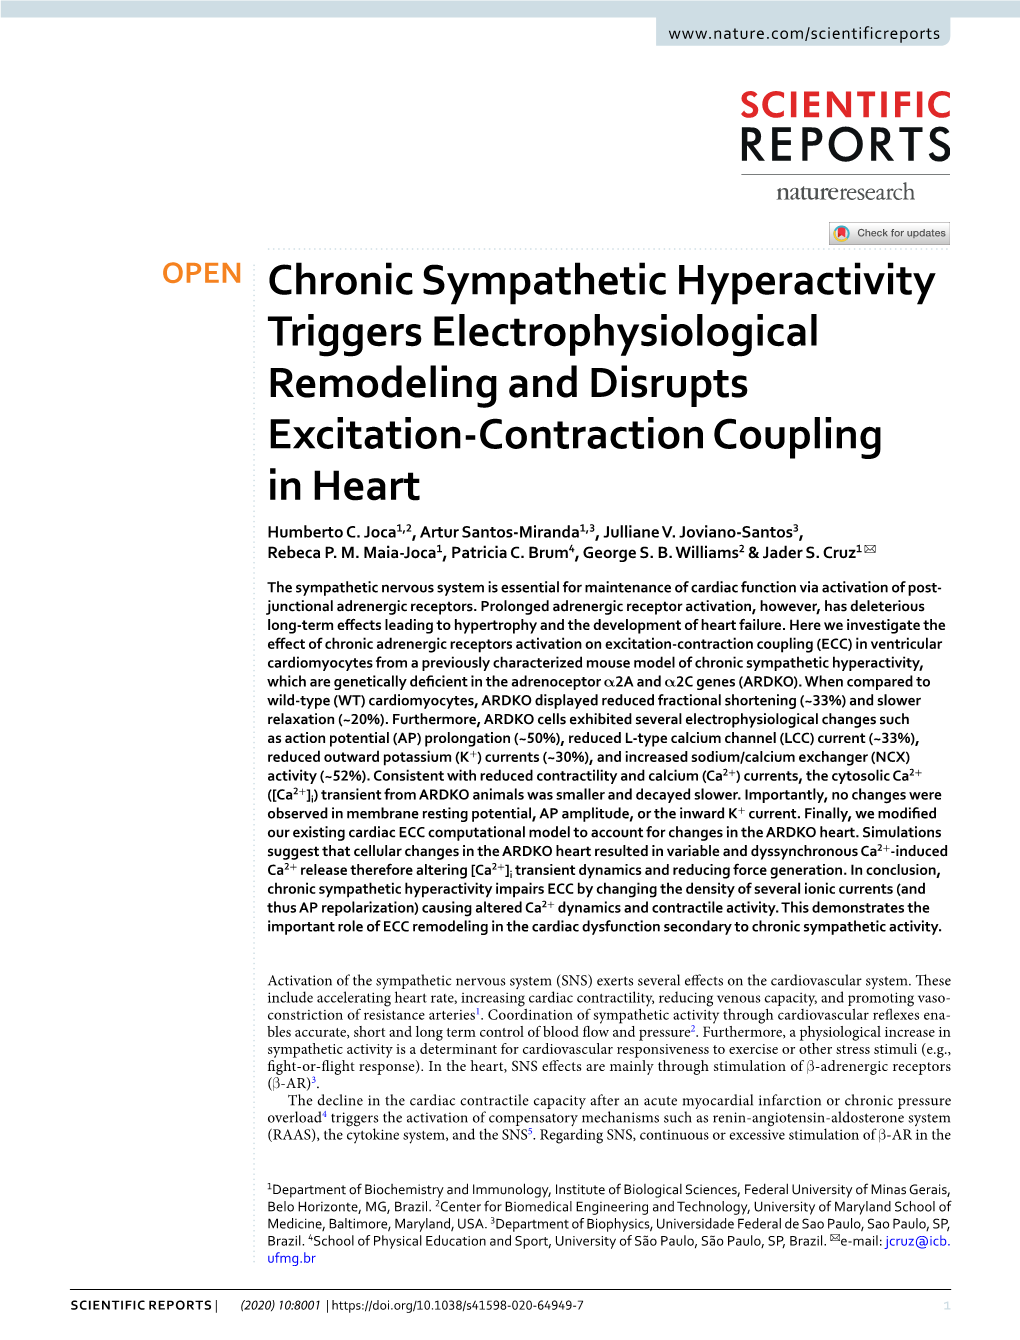 Chronic Sympathetic Hyperactivity Triggers Electrophysiological Remodeling and Disrupts Excitation-Contraction Coupling in Heart Humberto C